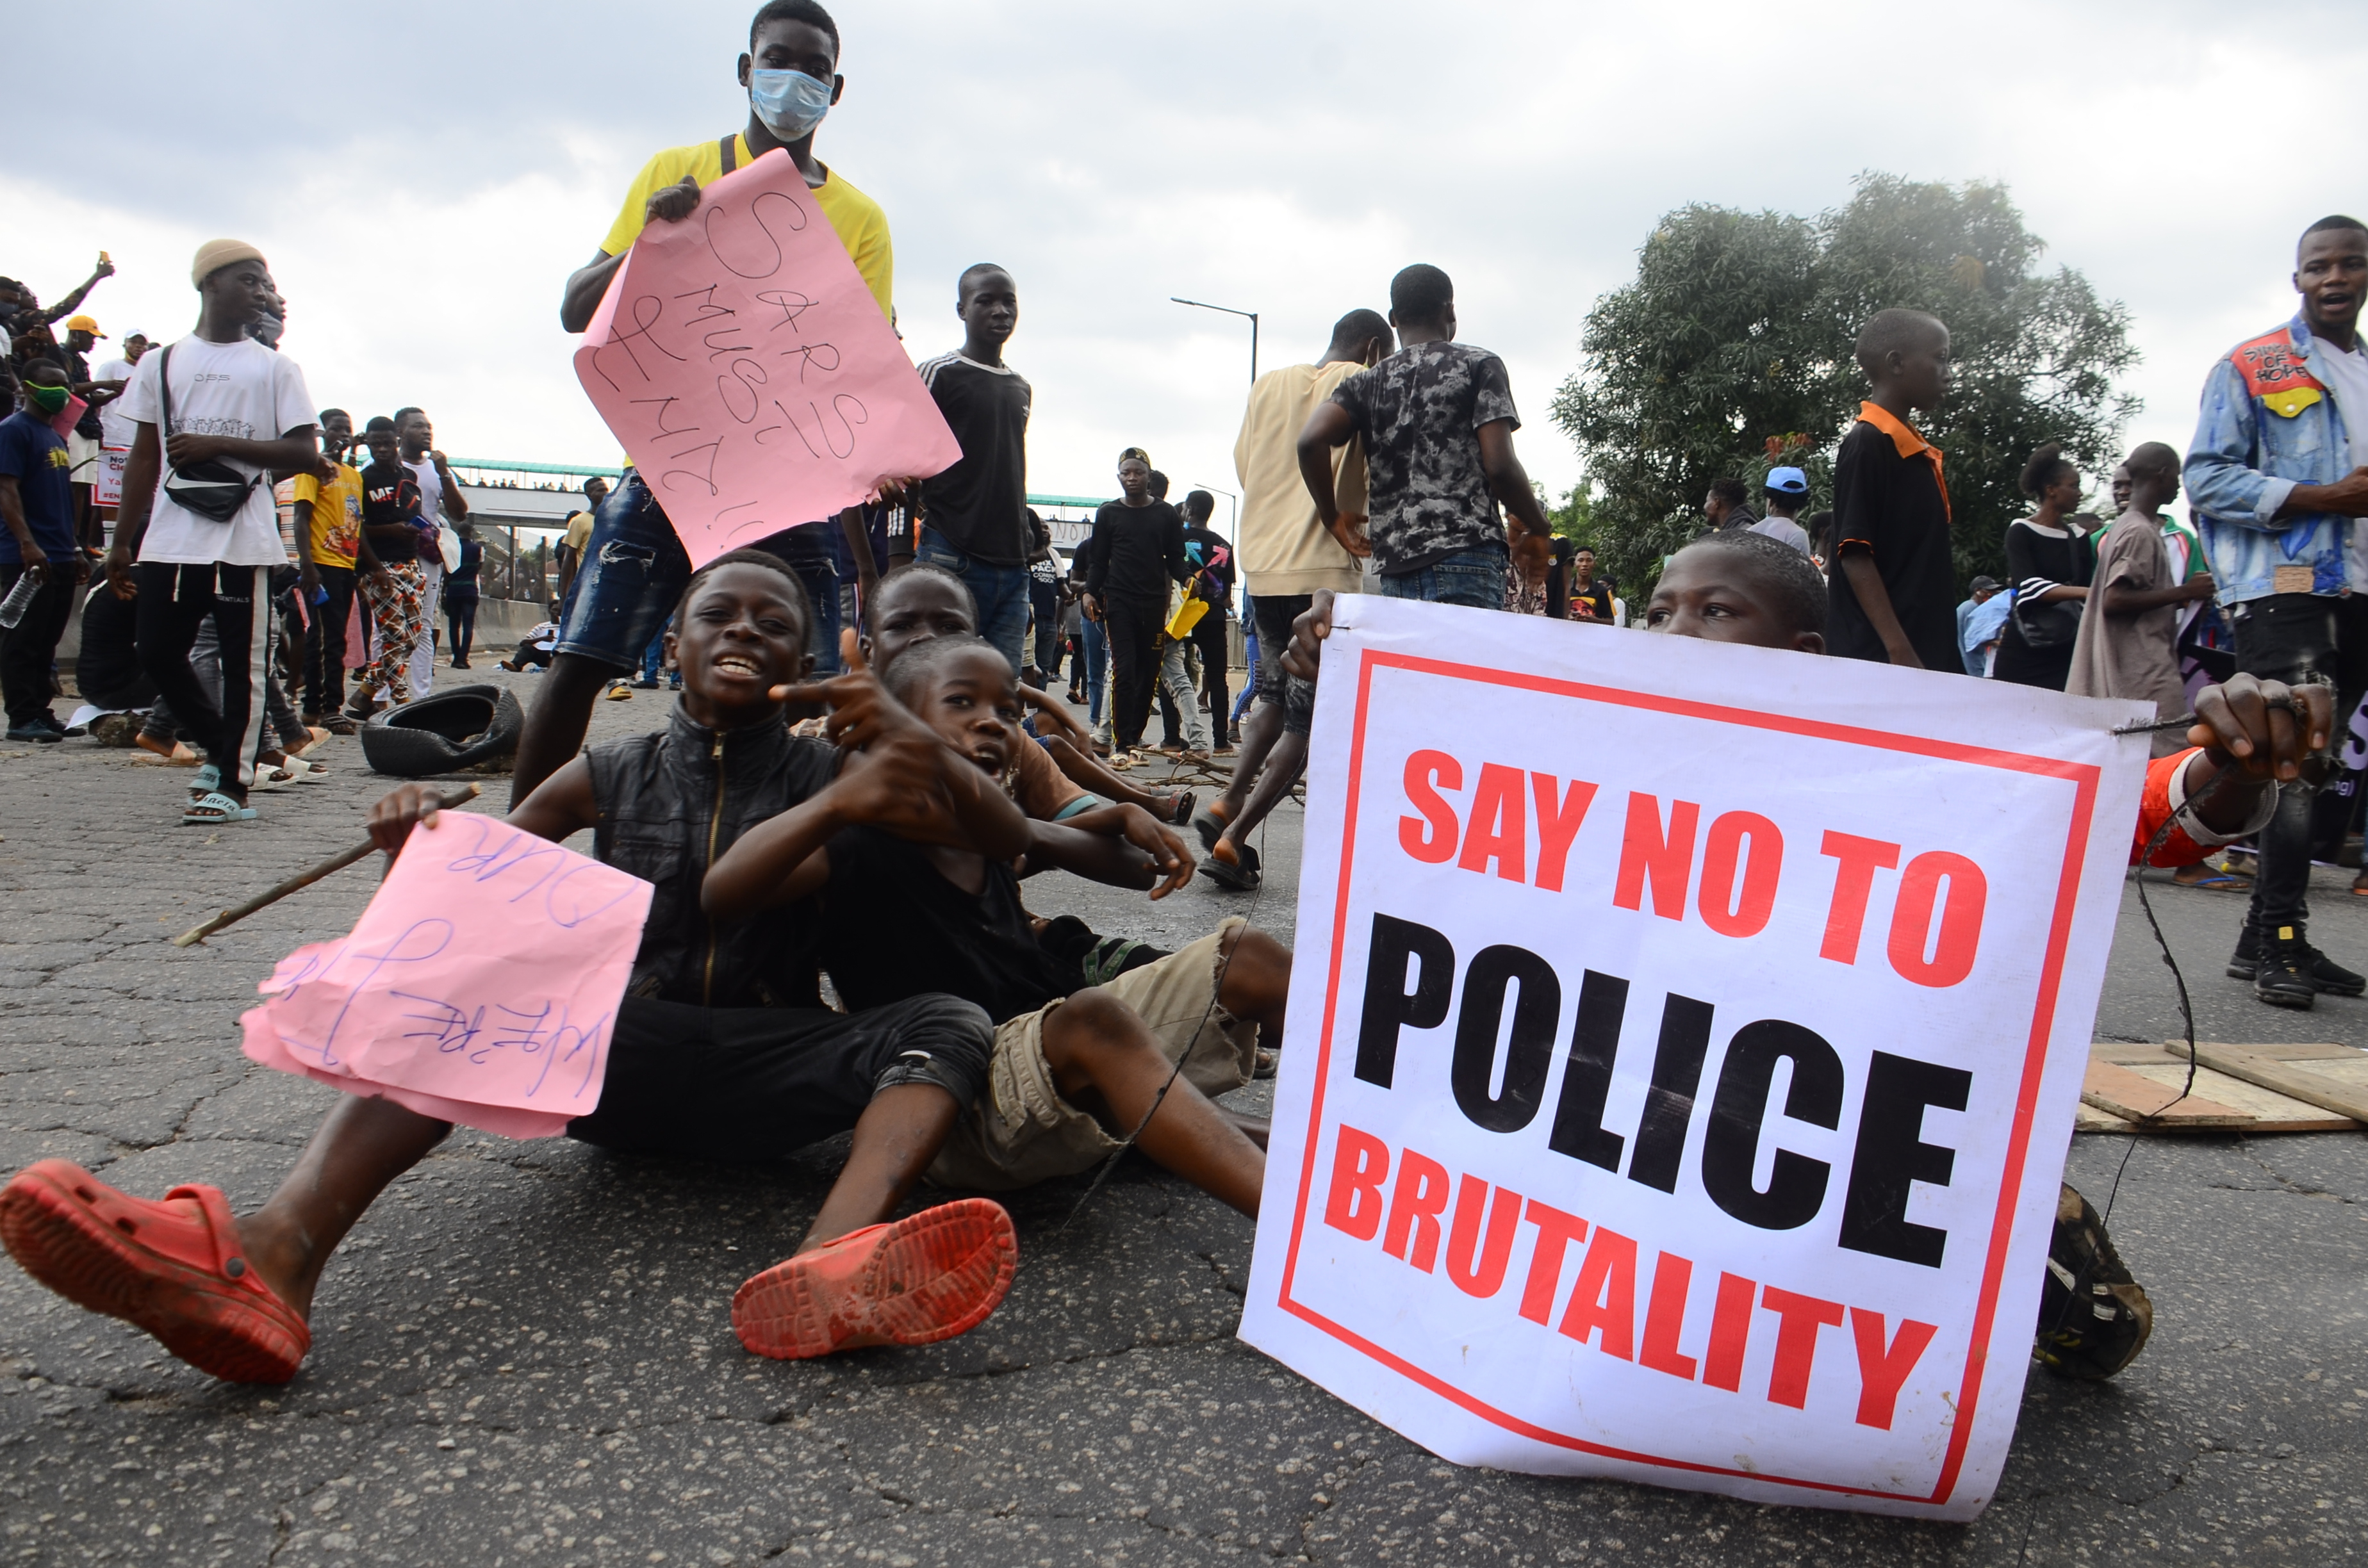 Nigeria Is Fighting Its Own Battle Against Police Brutality